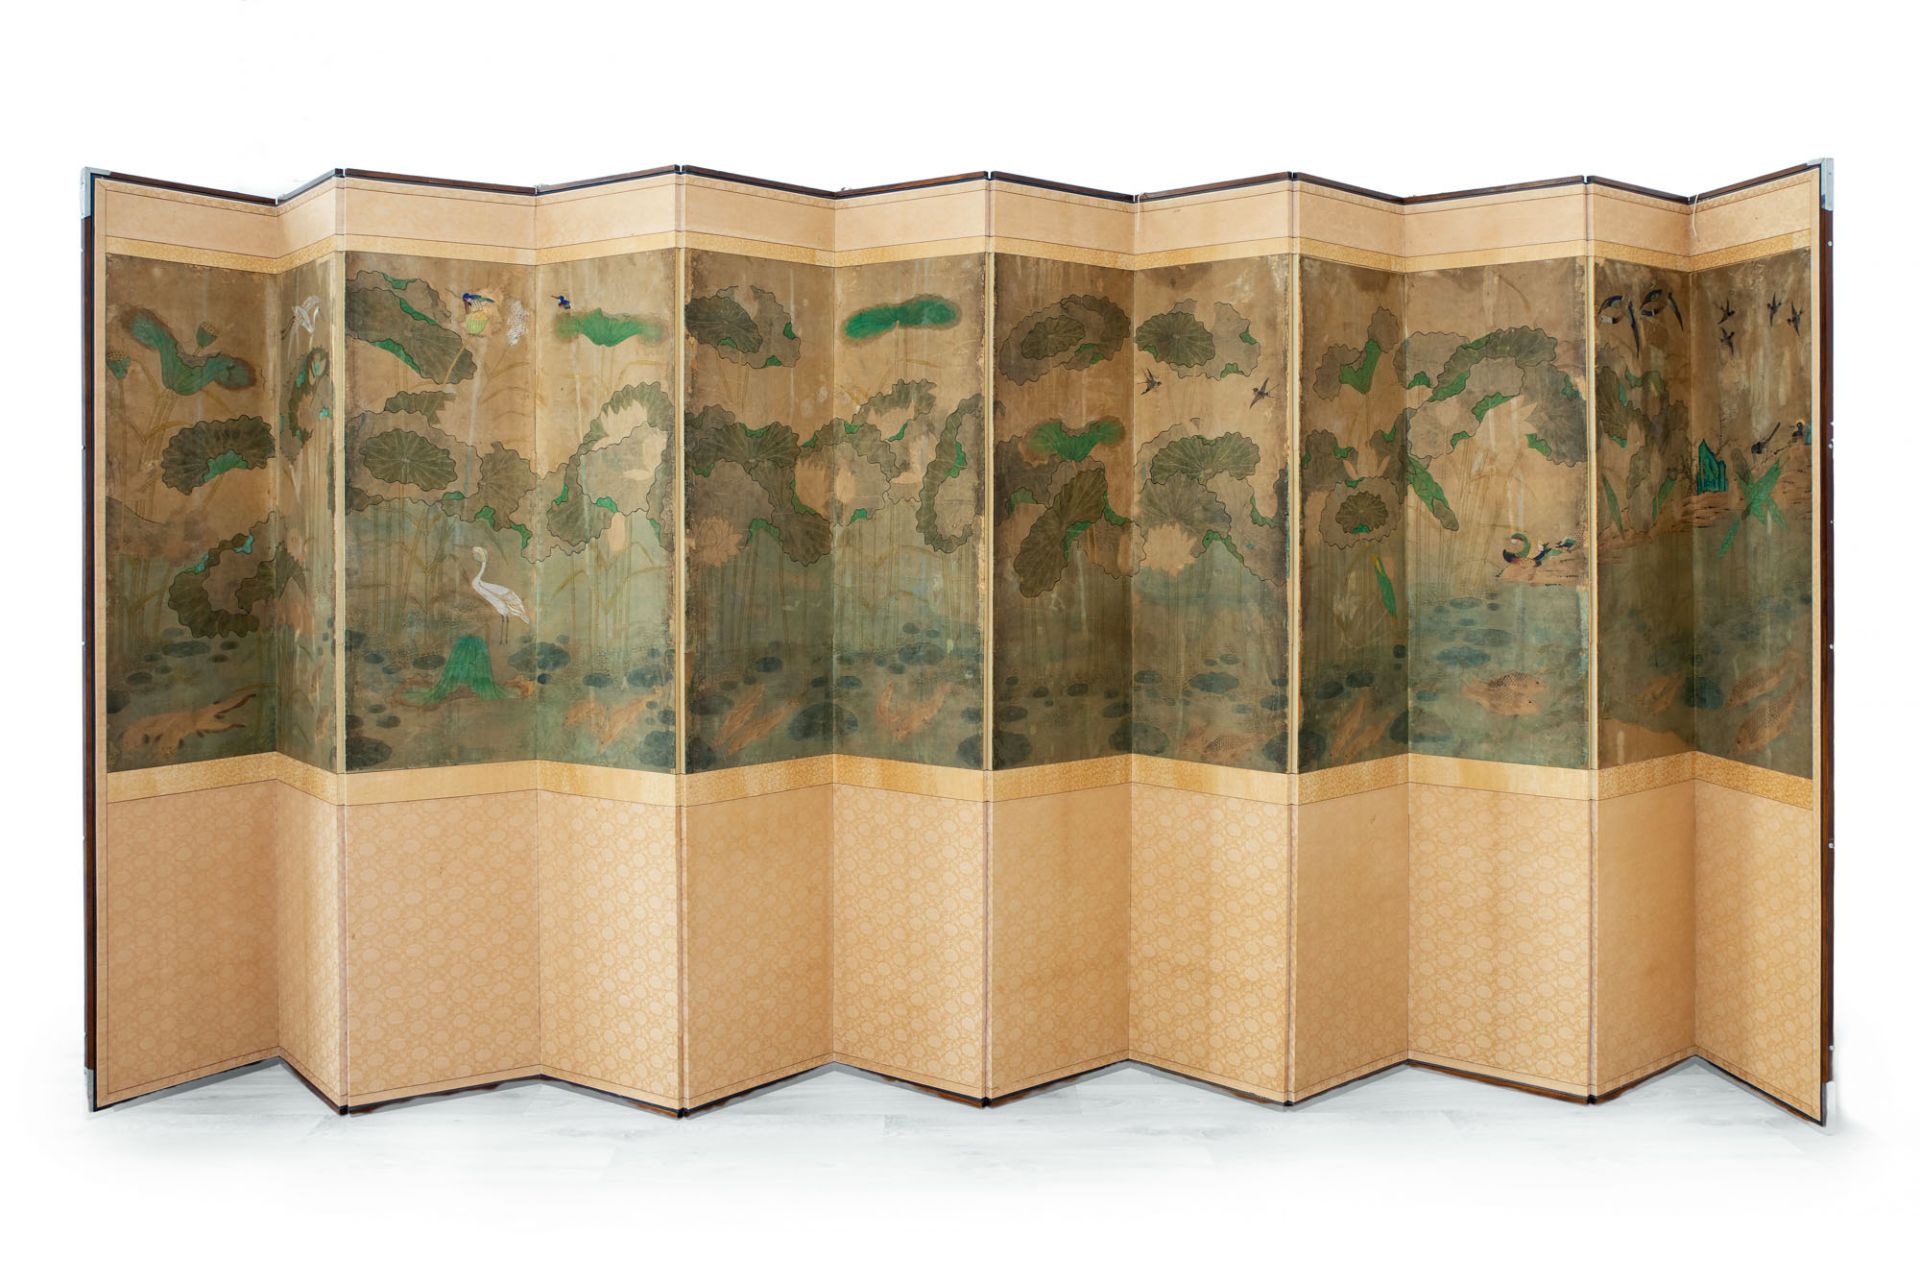 A Fine and Rare 12 Panel Library Room Divider, Korea, Jeju Island, 17th Century (according to the Na